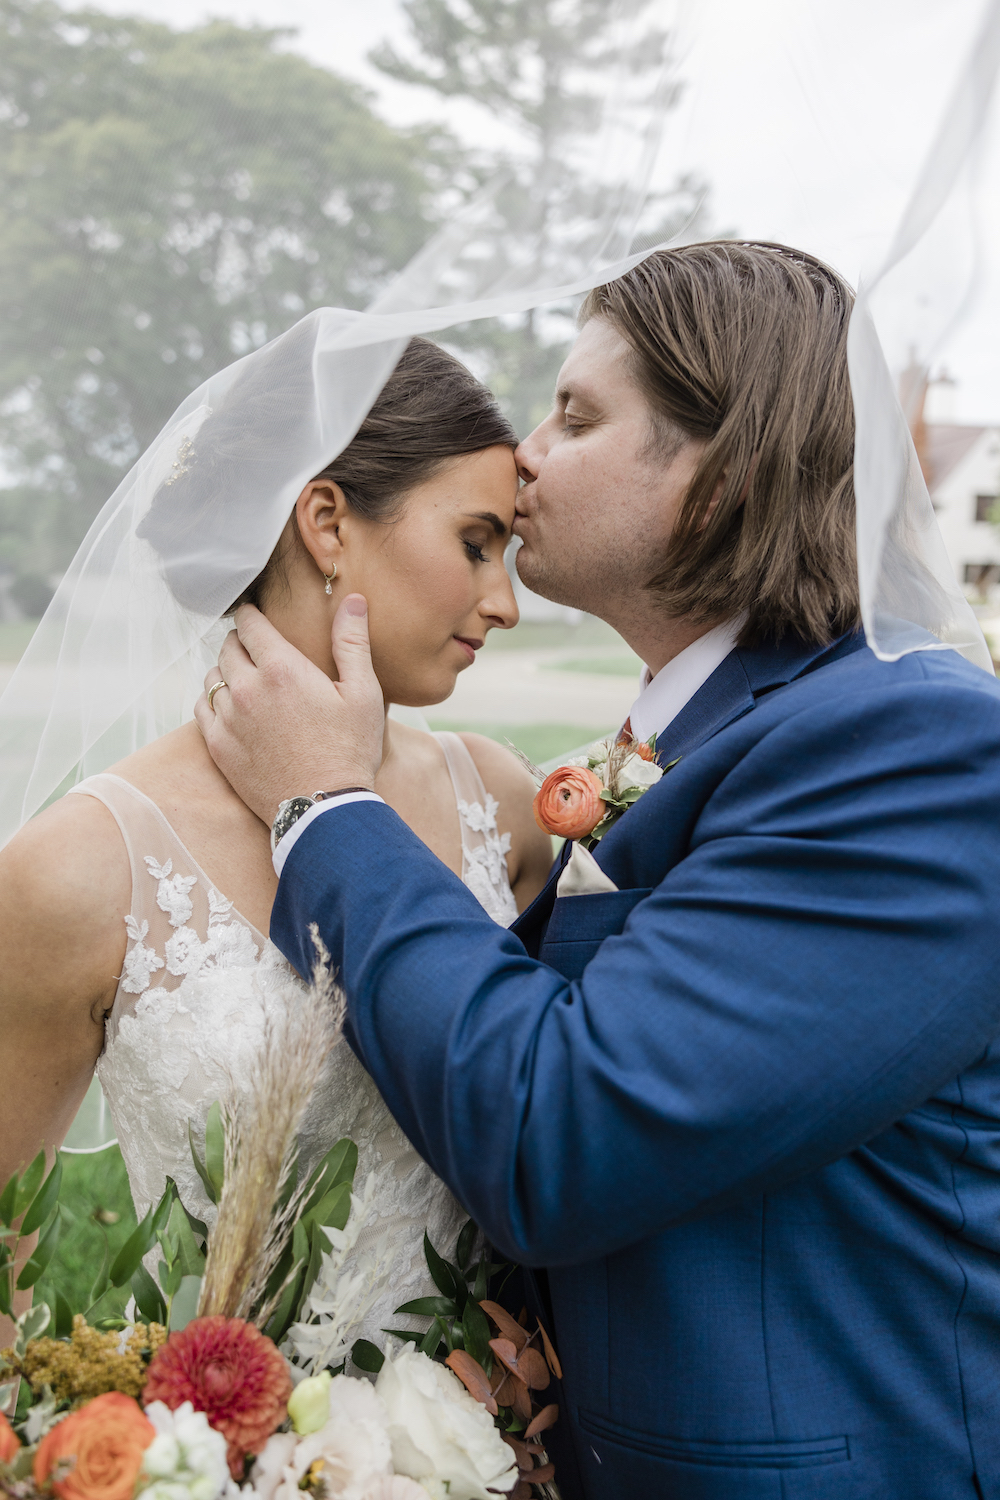 Groom plants a kiss on the bride's forehead under her sheer veil as she closes her eyes, captured by Michigan wedding photographer Holly Kattlegreen